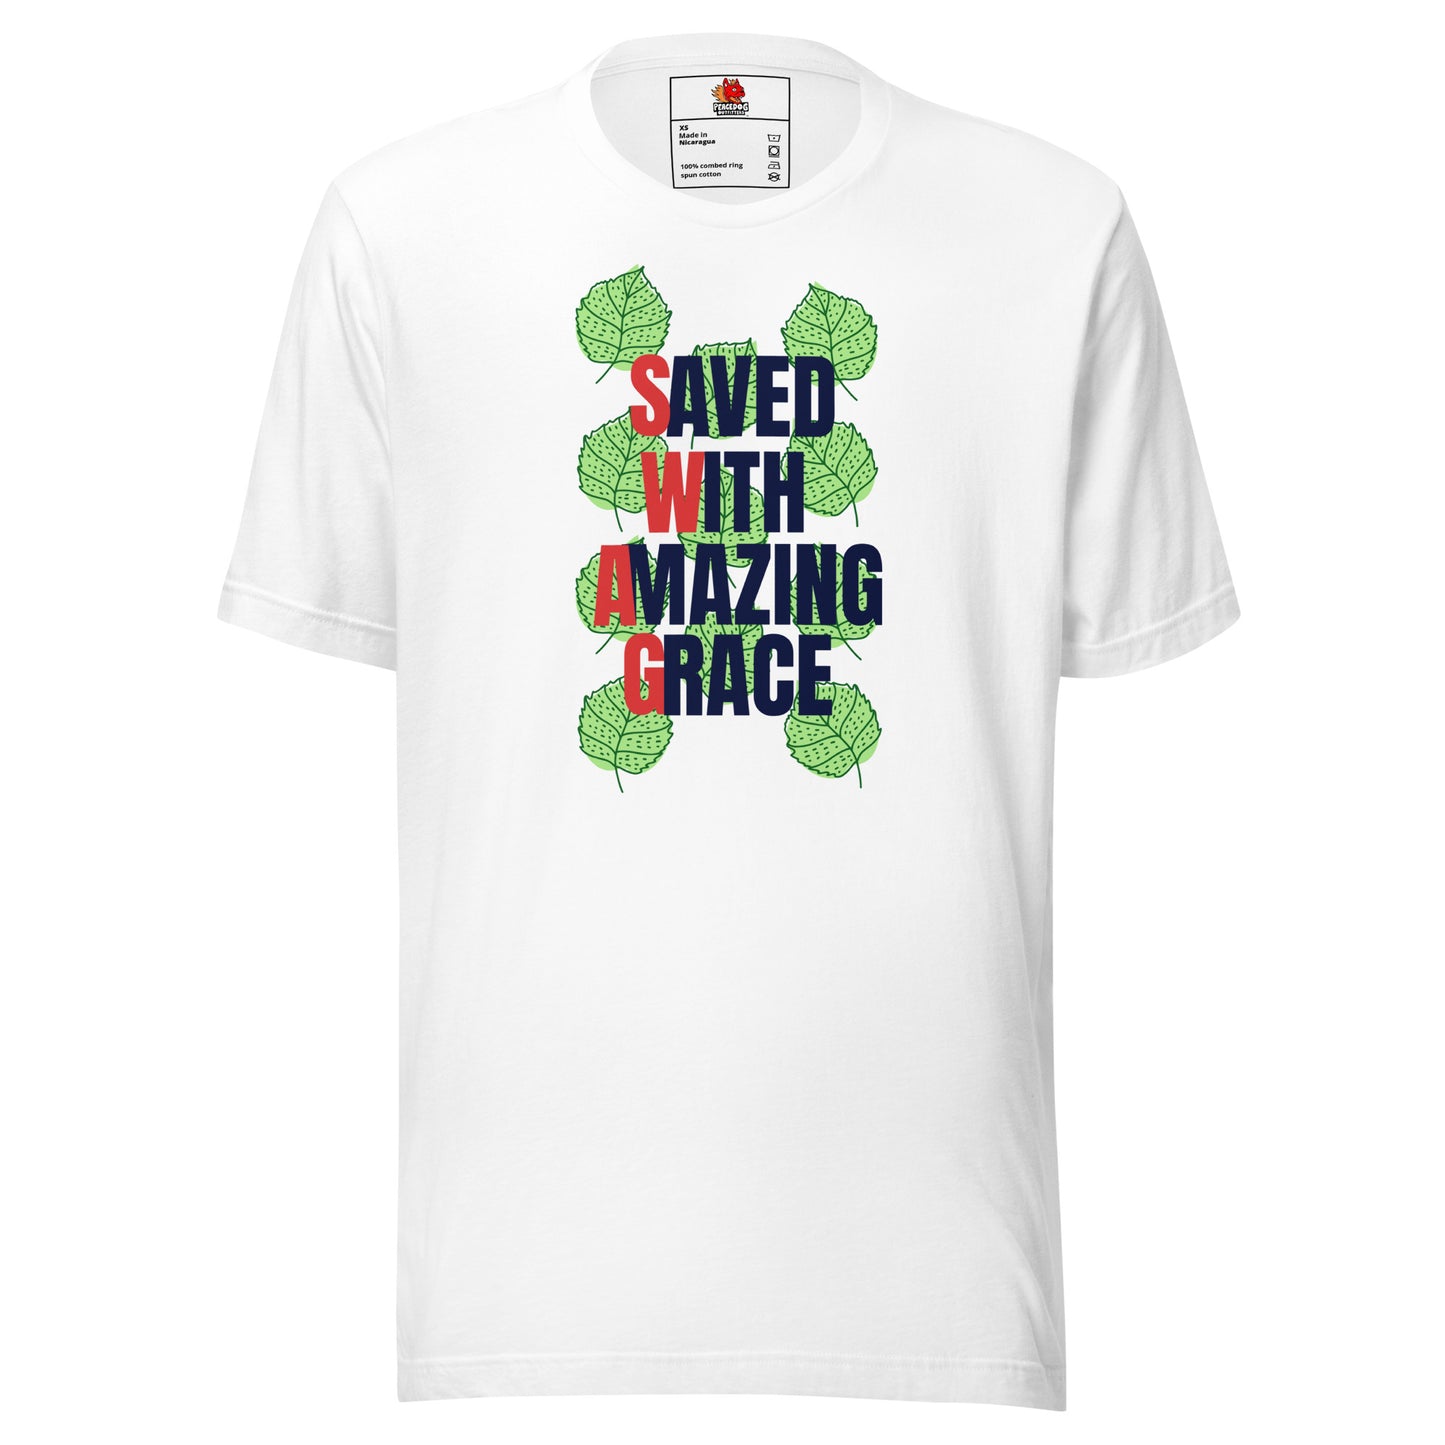 Saved With Amazing Grace T-Shirt